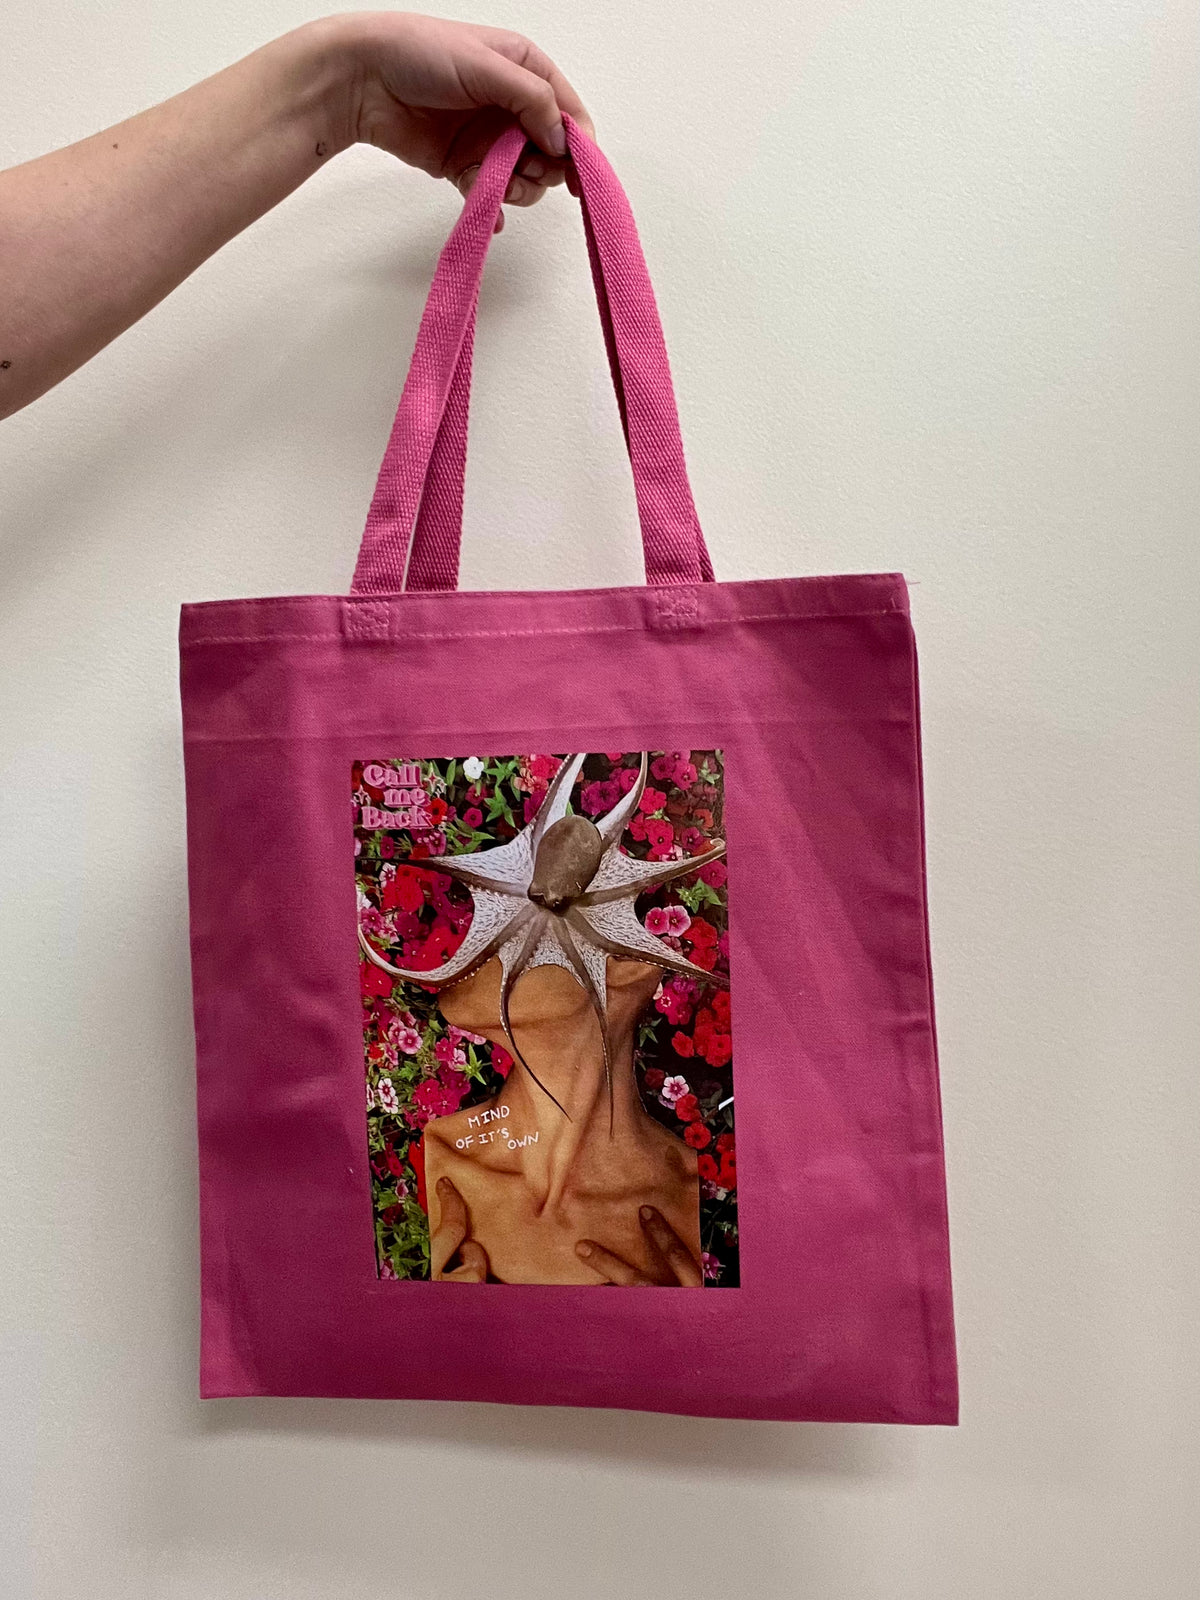 Mind of its Own Tote Bag | Call Me Back Collage